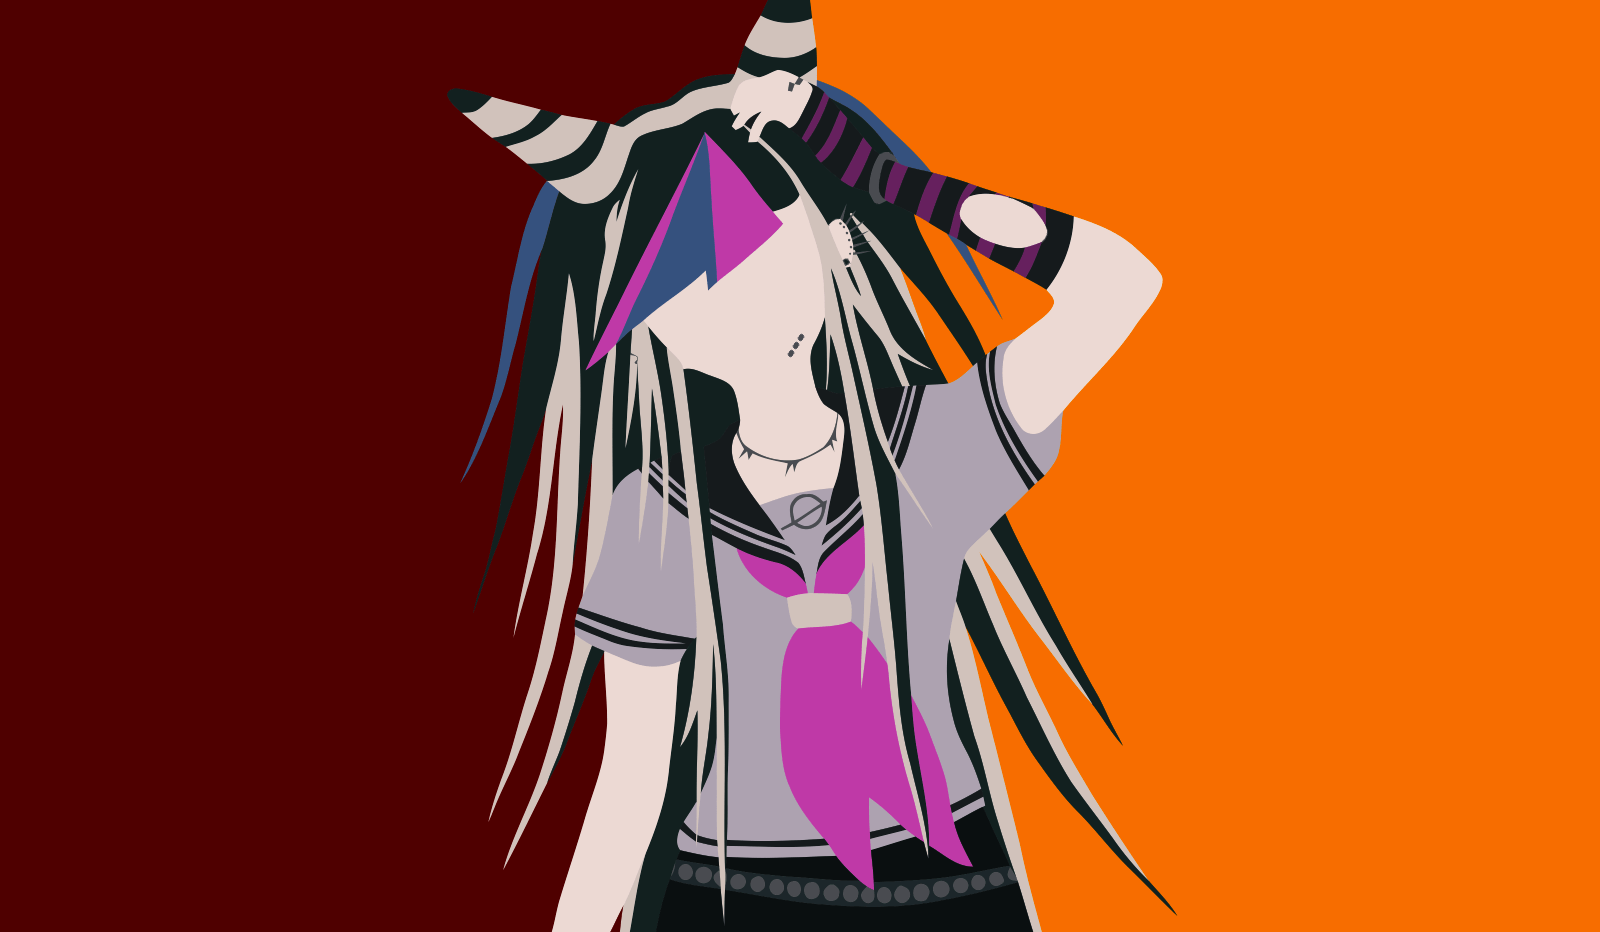 Made a Ibuki wallpaper a while ago and wanted to share